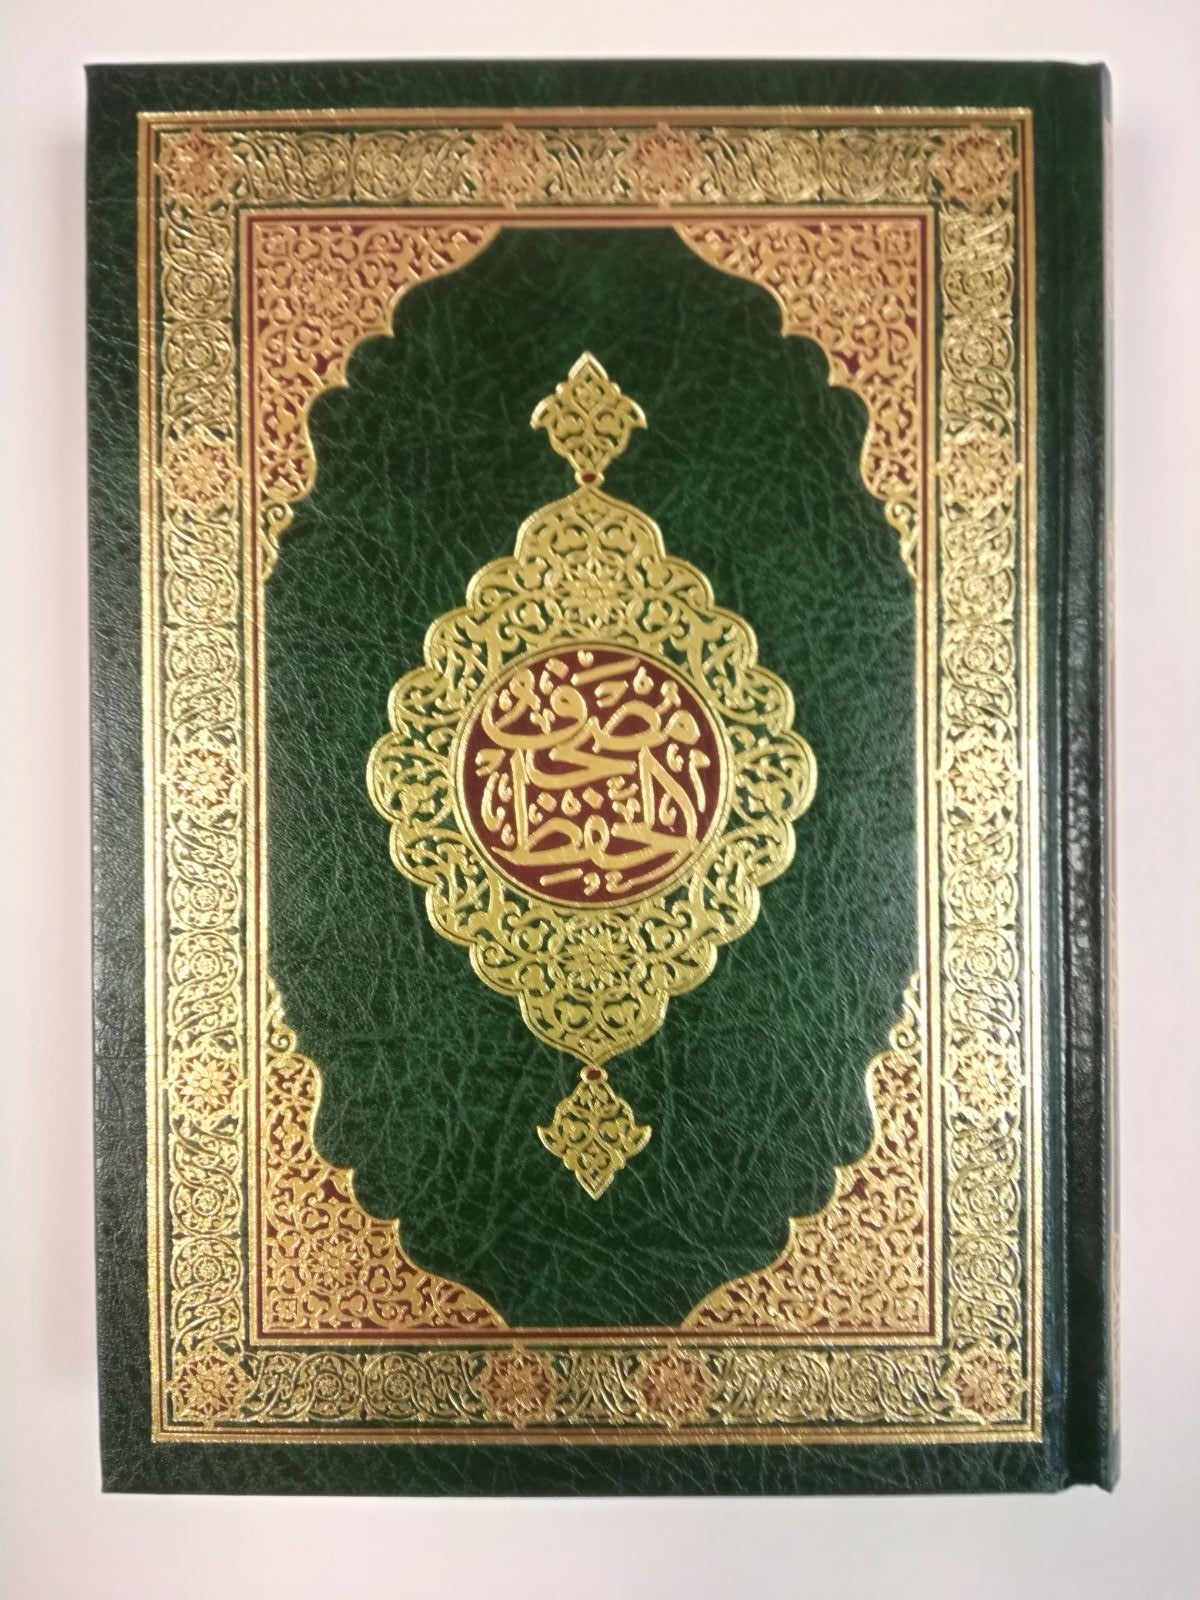 The Holy Qur'an